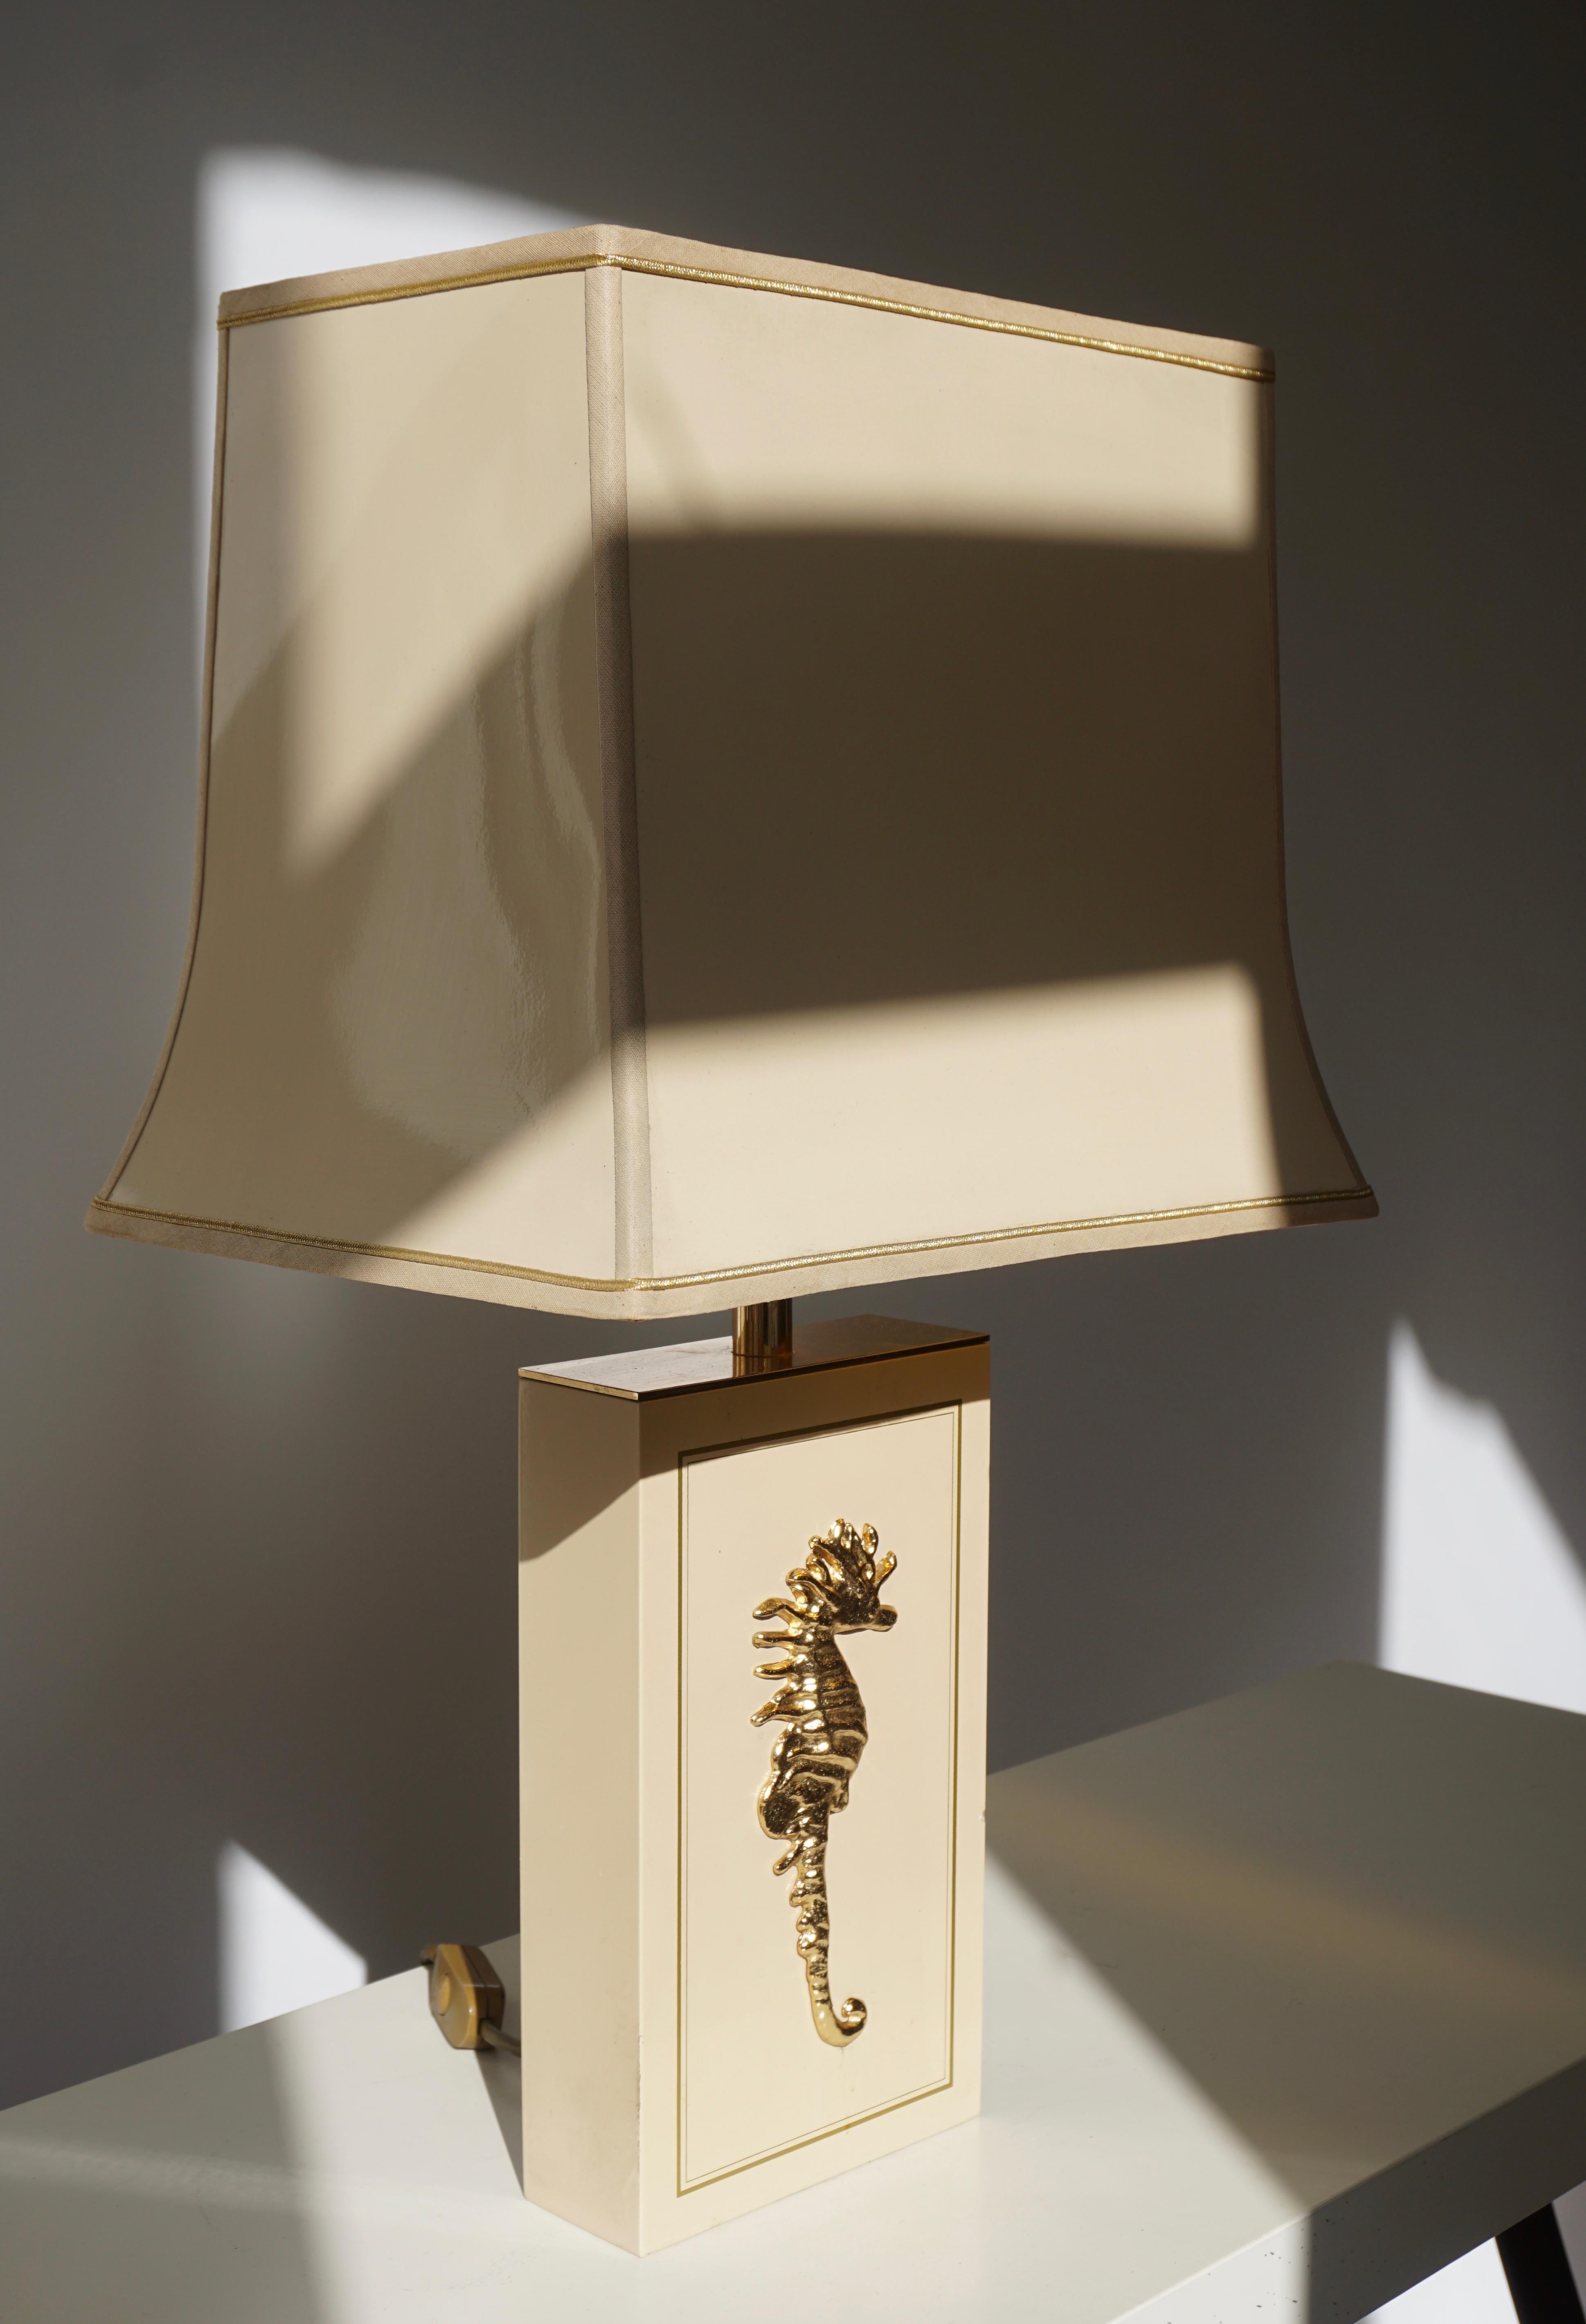 Two Belgian table lamps with a brass sea horse.
Measures: Height 61 cm.
Width 35 cm.
Depth 25 cm.